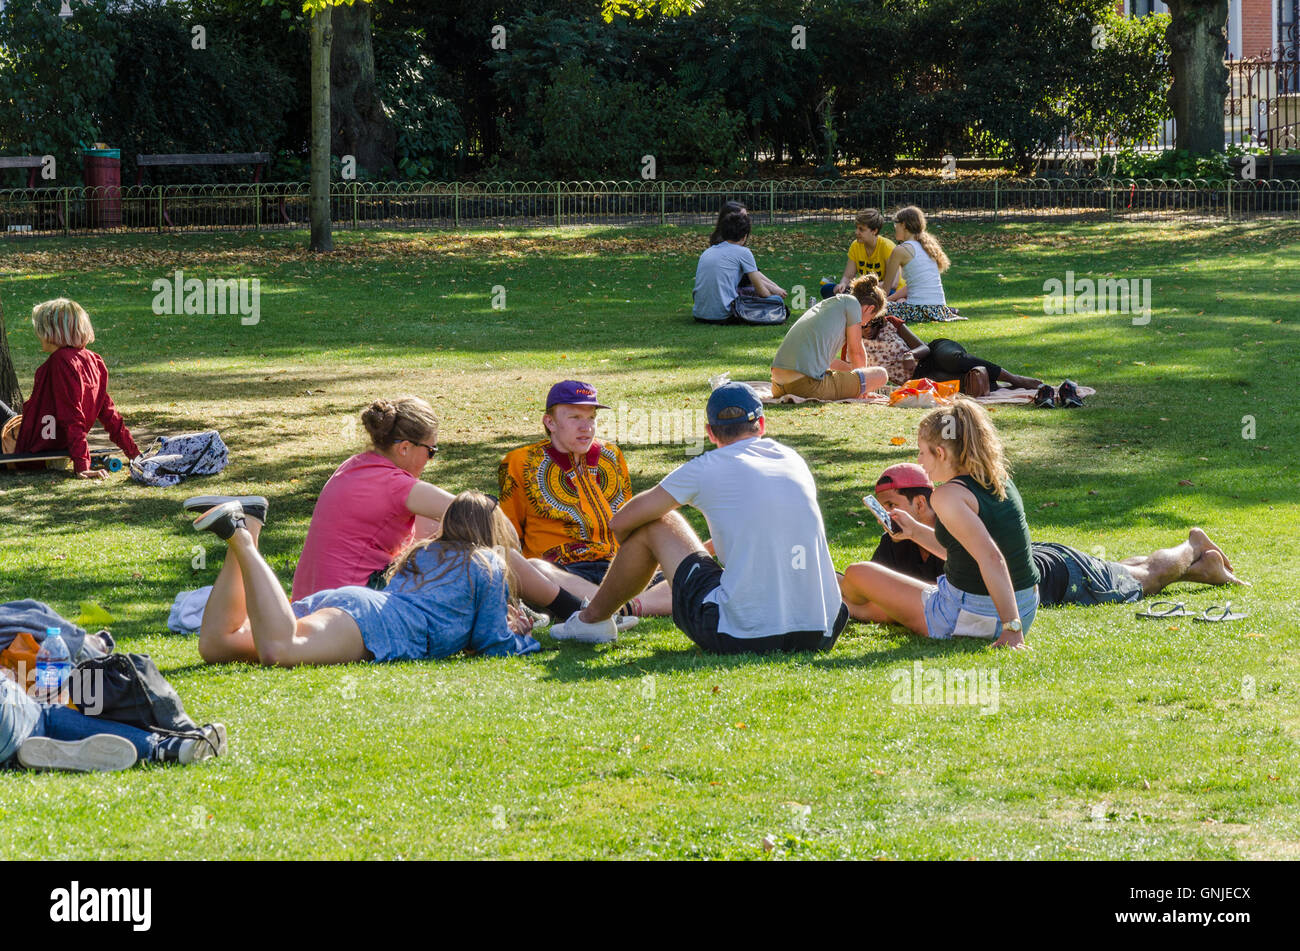 People relaxing and enjoying good weather on a summer's day in Forbury Gardens in Reading, Berkshire. Stock Photo